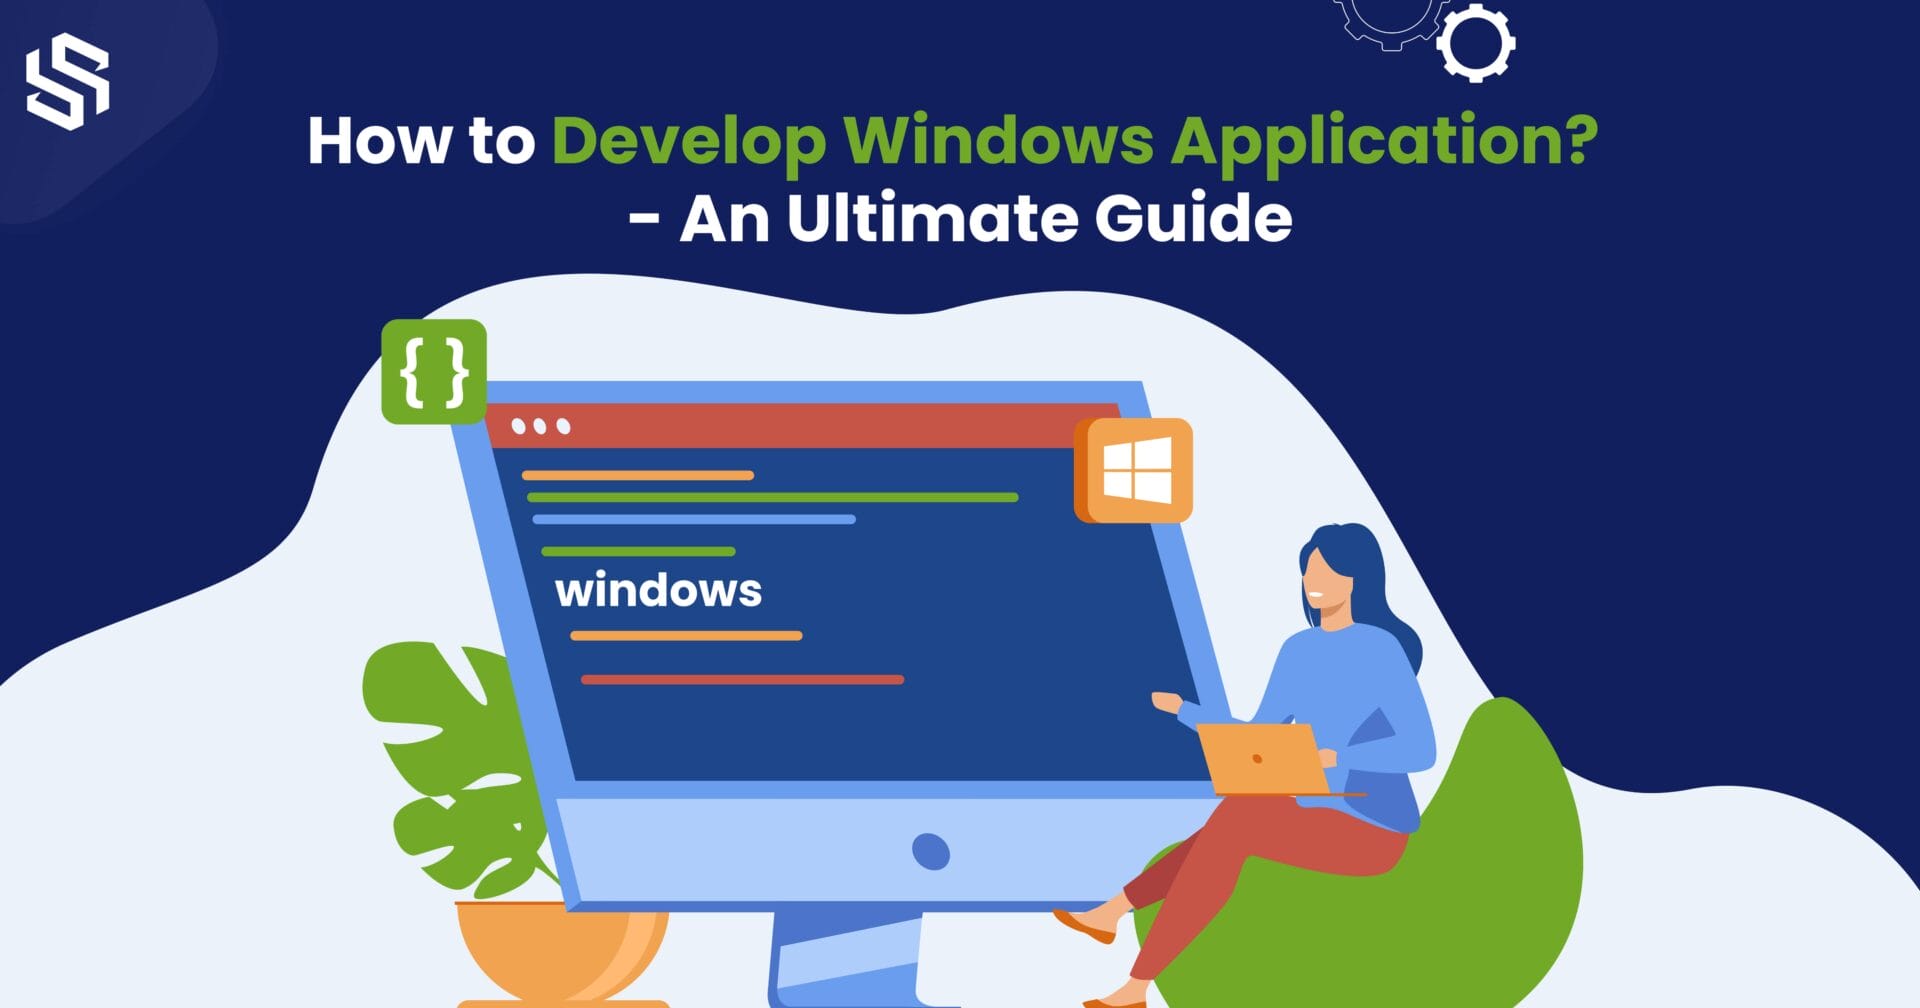 How to Build Windows Application - An Ultimate Guide